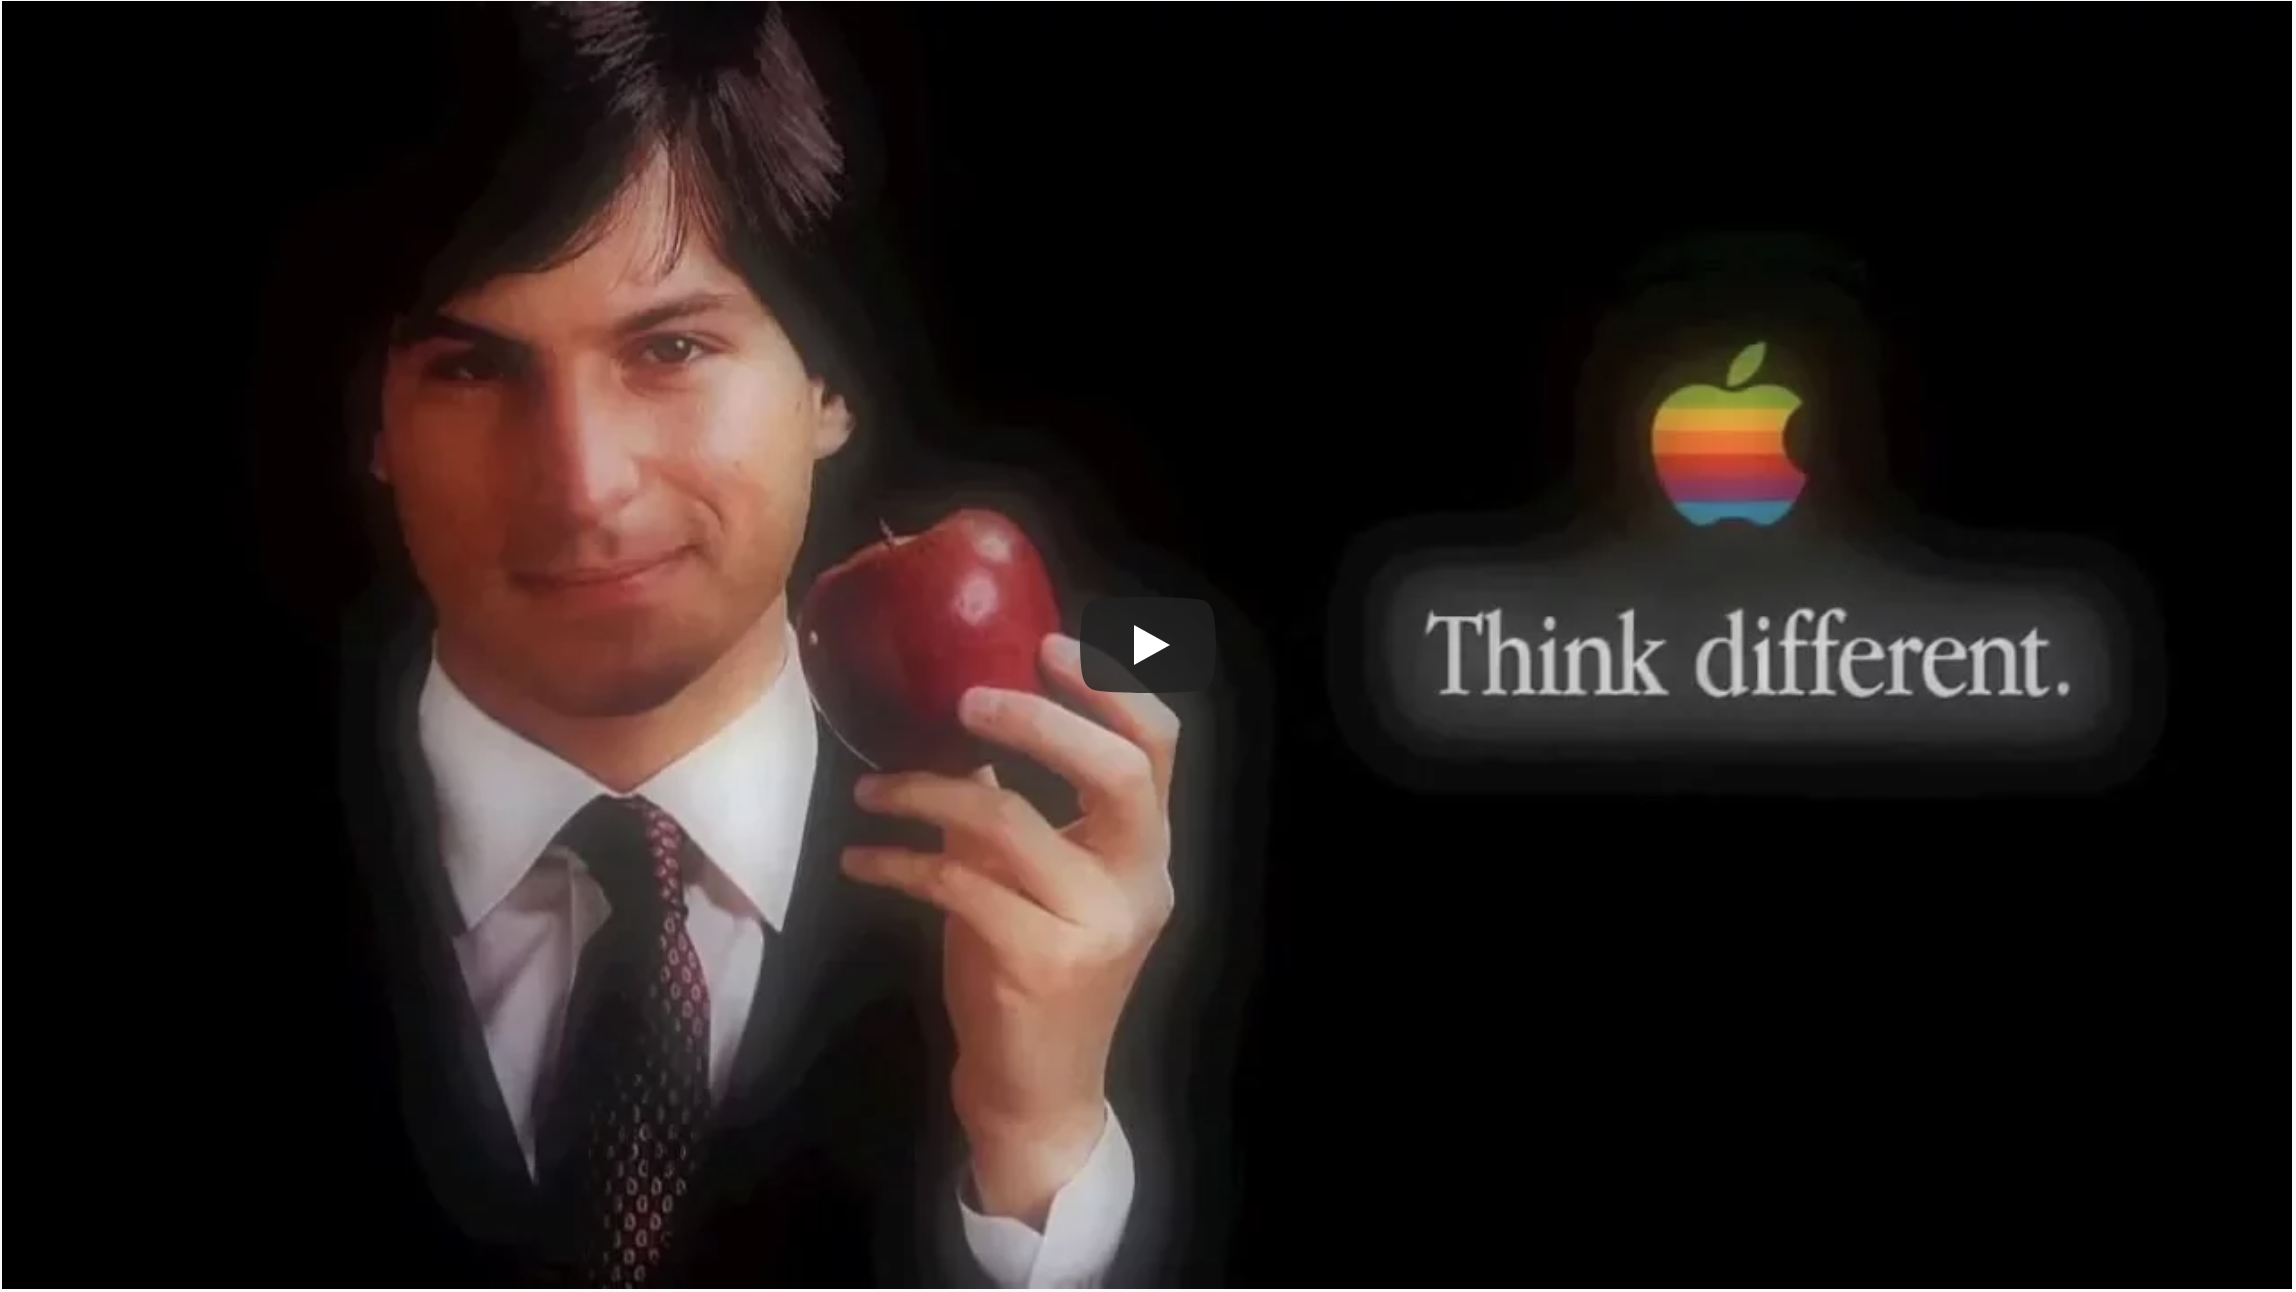 Image shows a man in a suit holding an Apple. Behind him is the Apple logo and the slogan 'think difefrent'